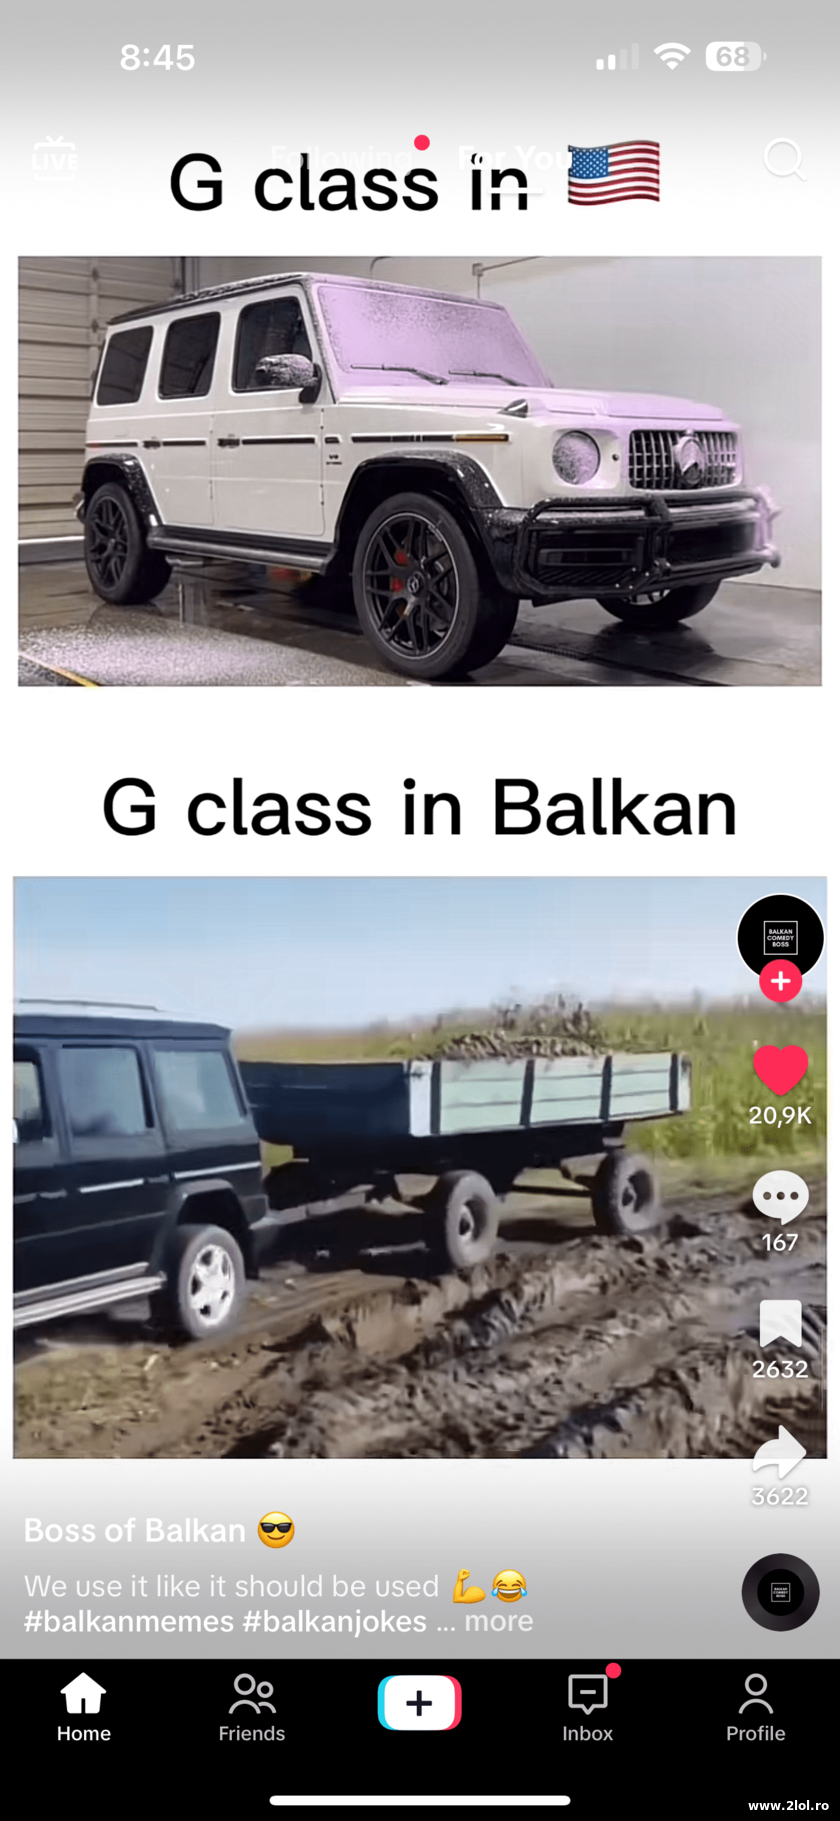 G class in USA and in Balkan | poze haioase